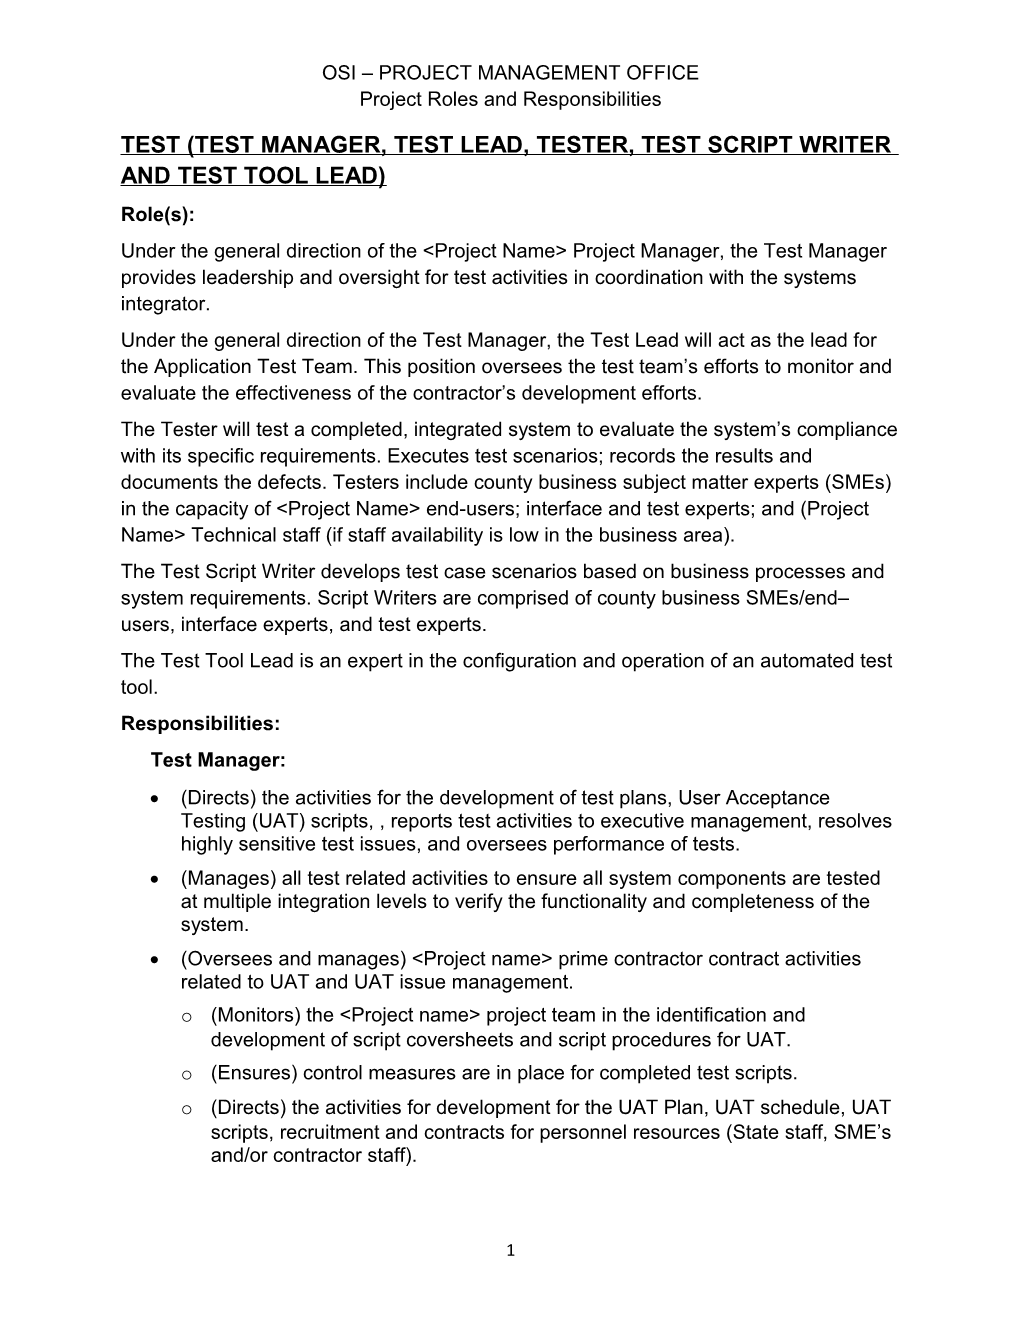 Test (Test Manager, Test Lead, Tester, Test Script Writer and Test Tool Lead)